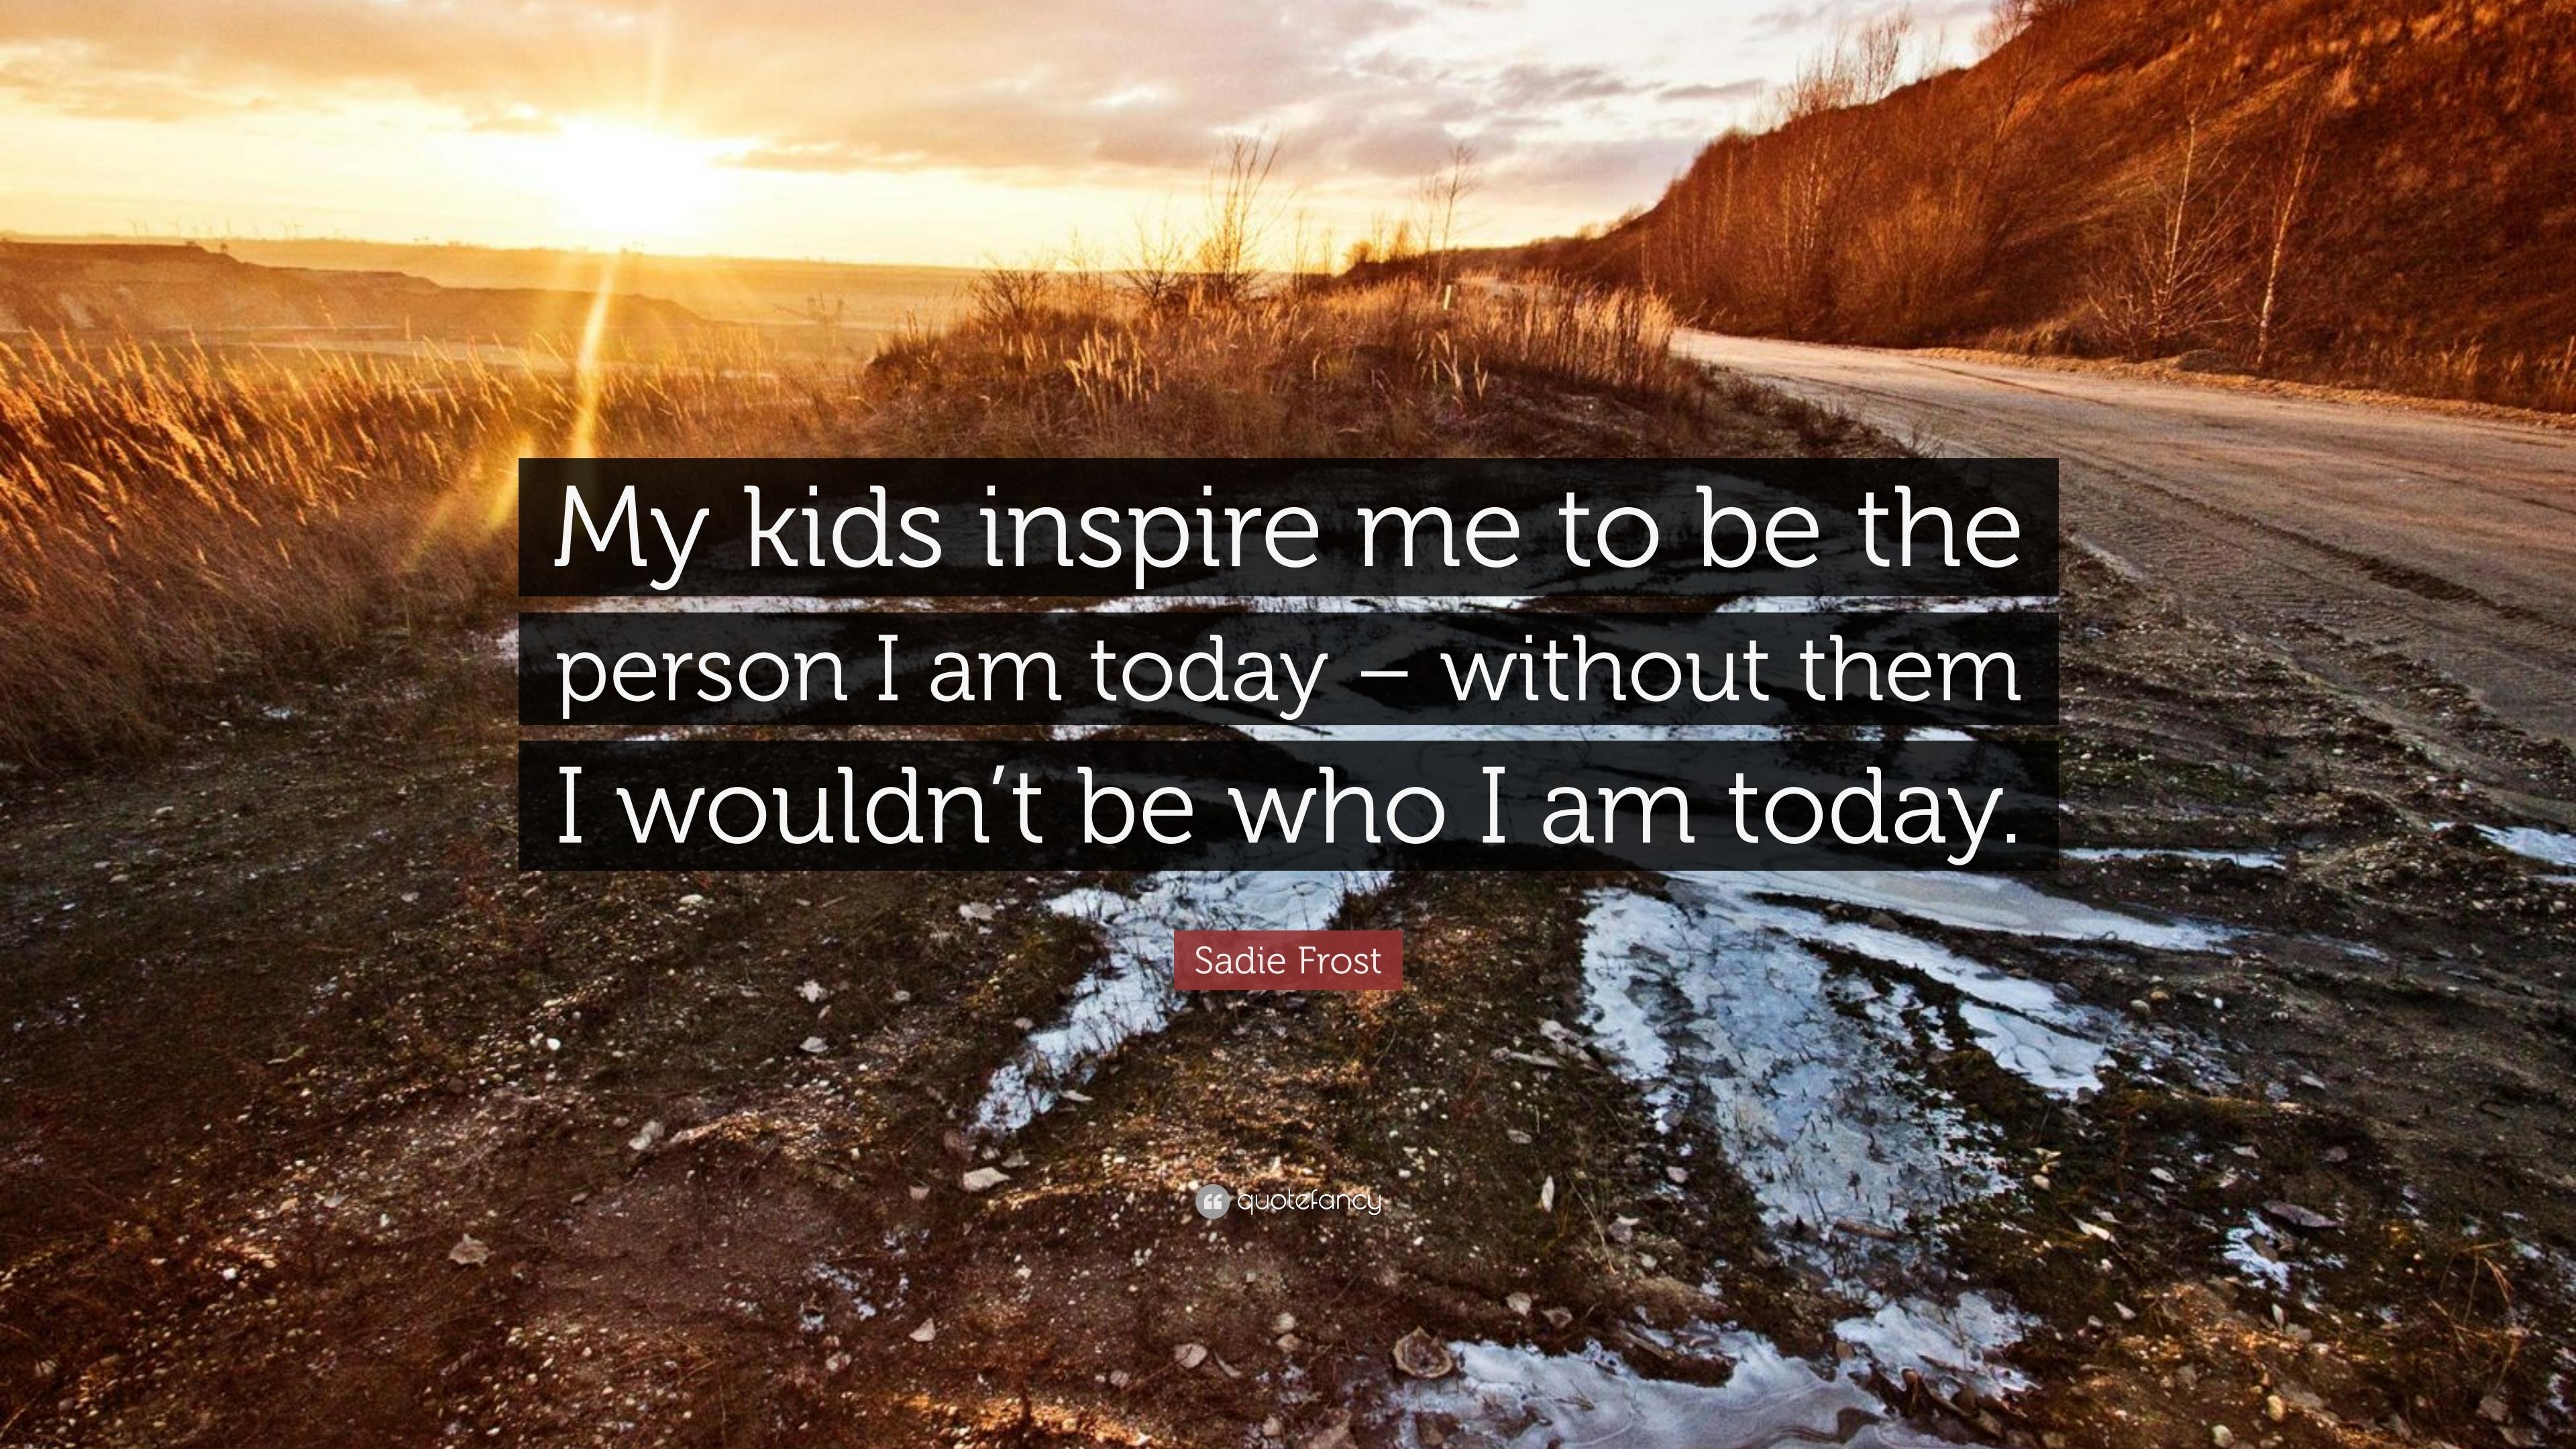 Sadie Frost Quote: “My kids inspire me to be the person I am